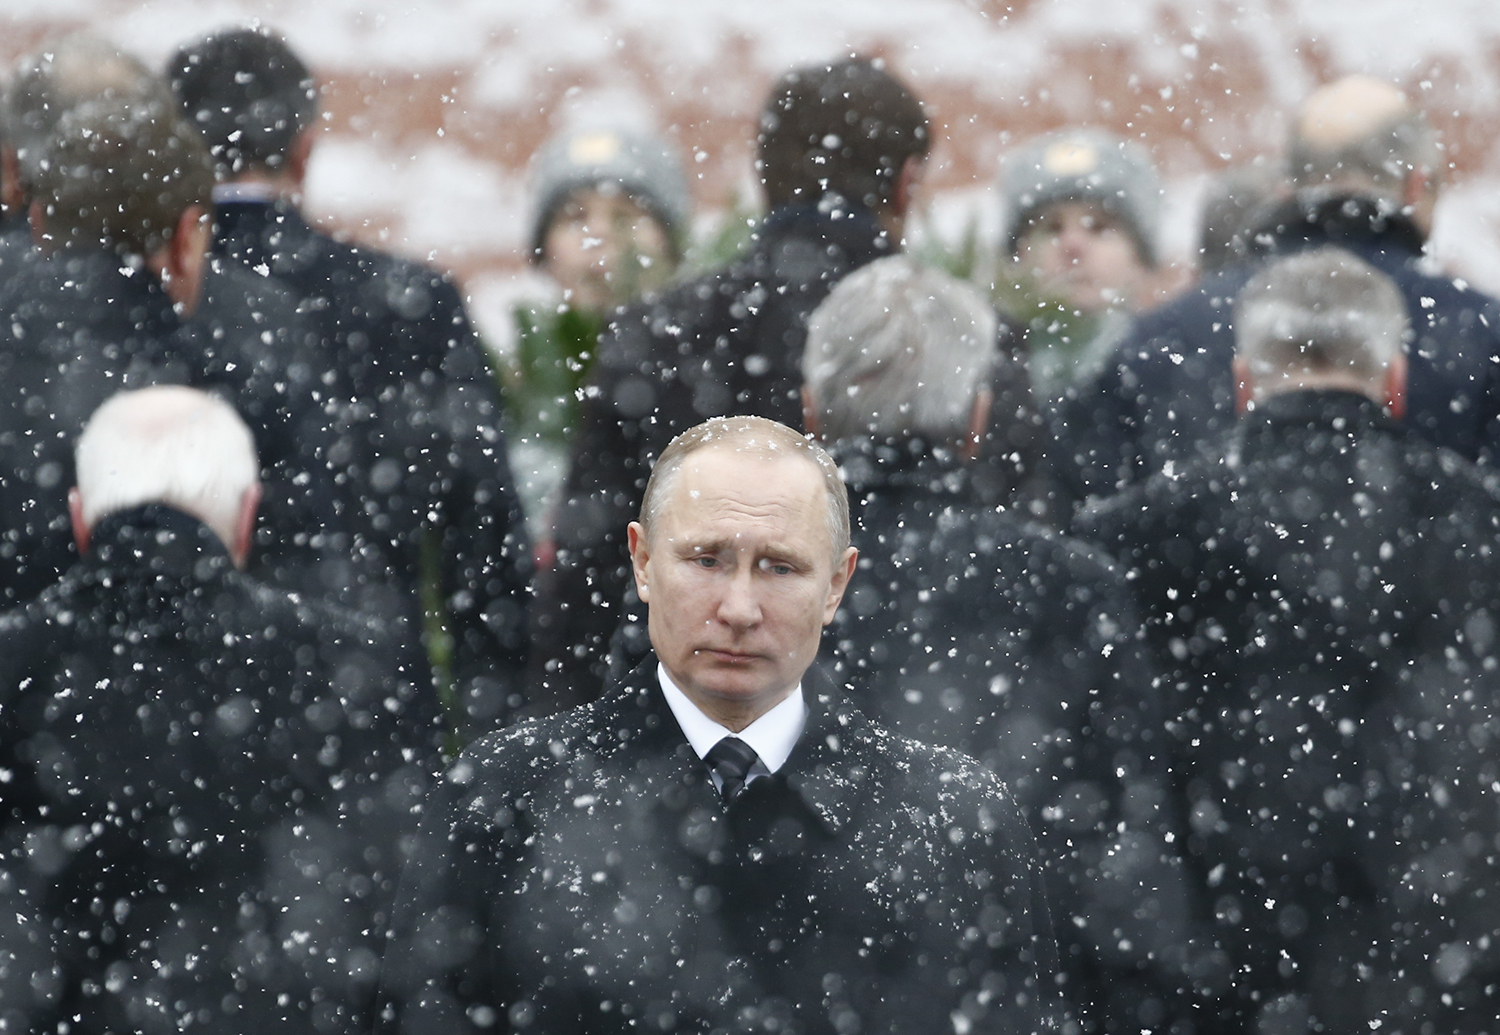 MOSCOW 2017-02-23 Russian President Vladimir Putin attends a wreath laying ceremony to mark the Defender of the Fatherland Day at the Tomb of the Unknown Soldier by the Kremlin wall in central Moscow, Russia February 23, 2017. REUTERS/Sergei Karpukhin TPX IMAGES OF THE DAY Photo: / REUTERS / TT / kod 72000